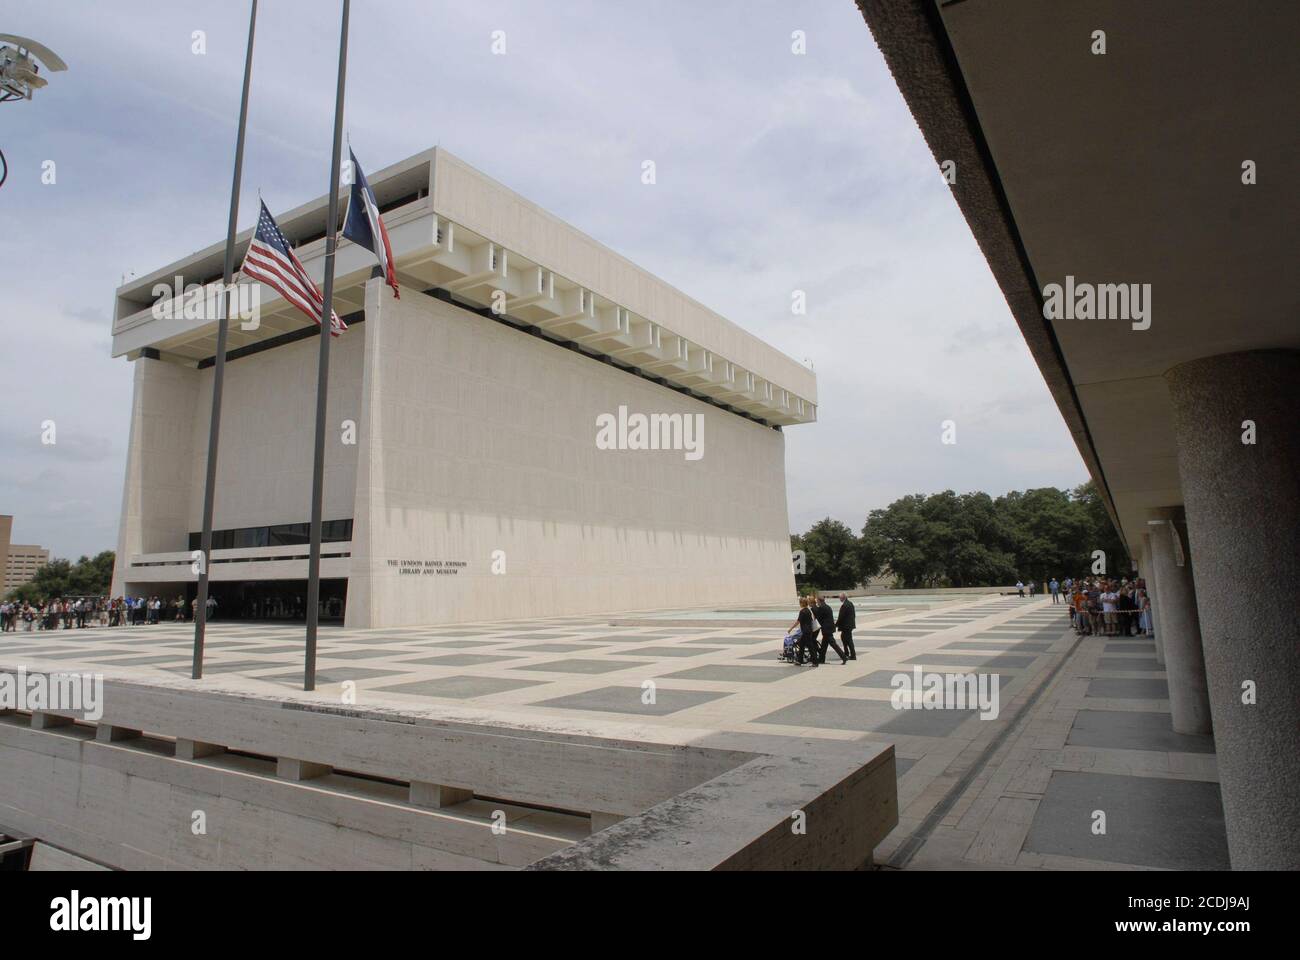 Austin, Texas: July 13, 2007: Family members arrive at the LBJ Library prior to a public viewing of the casket of former First Lady Lady Bird Johnson. Mrs. Johnson, the widow of former Pres. Lyndon B. Johnson, died Wednesday, July 11, at age 94. ©Marjorie Cotera/Daemmrich Photography Stock Photo